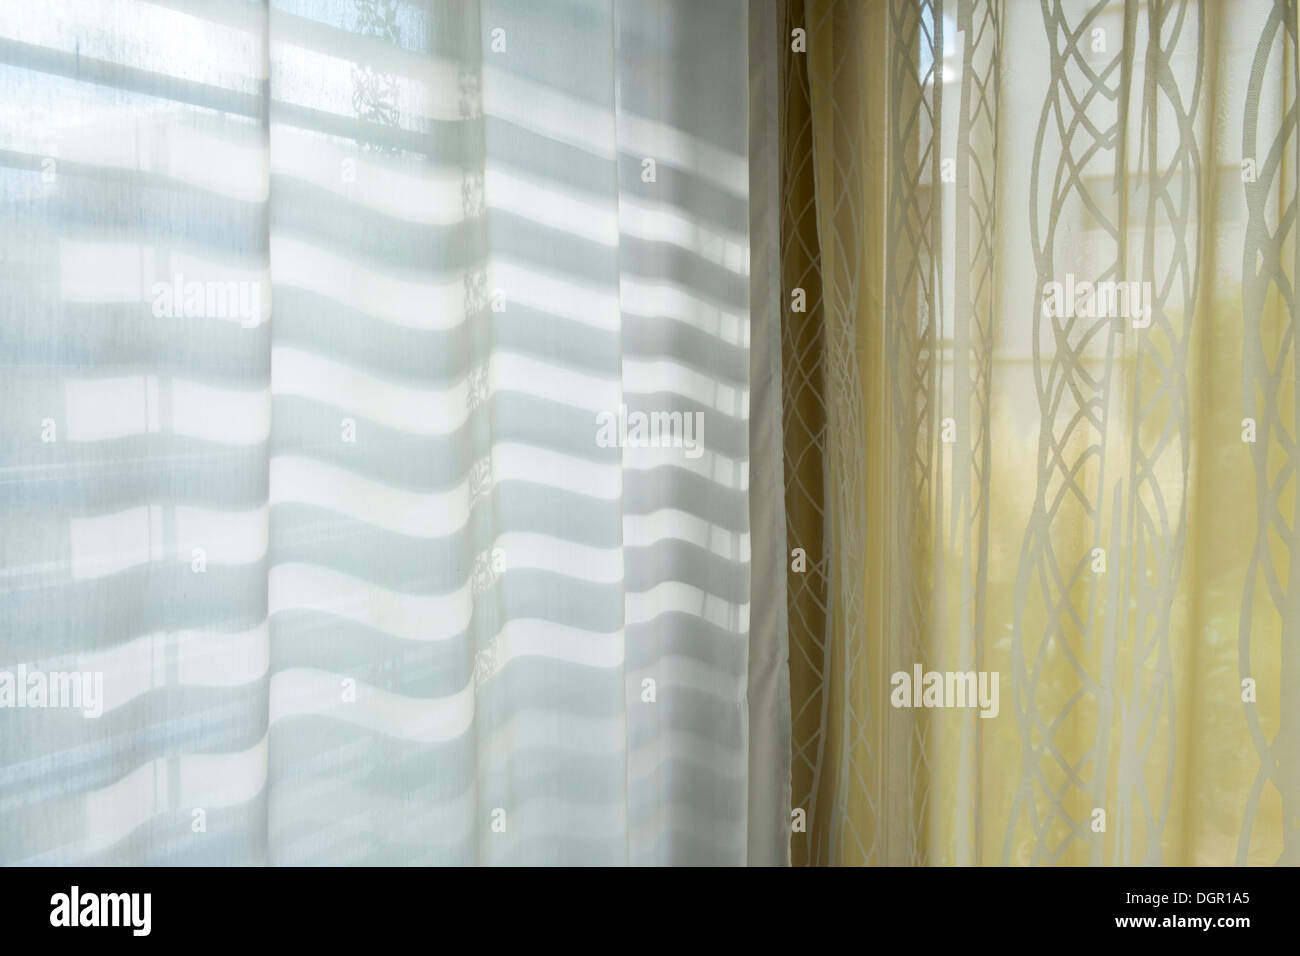 Louvers shadows and curtains Stock Photo